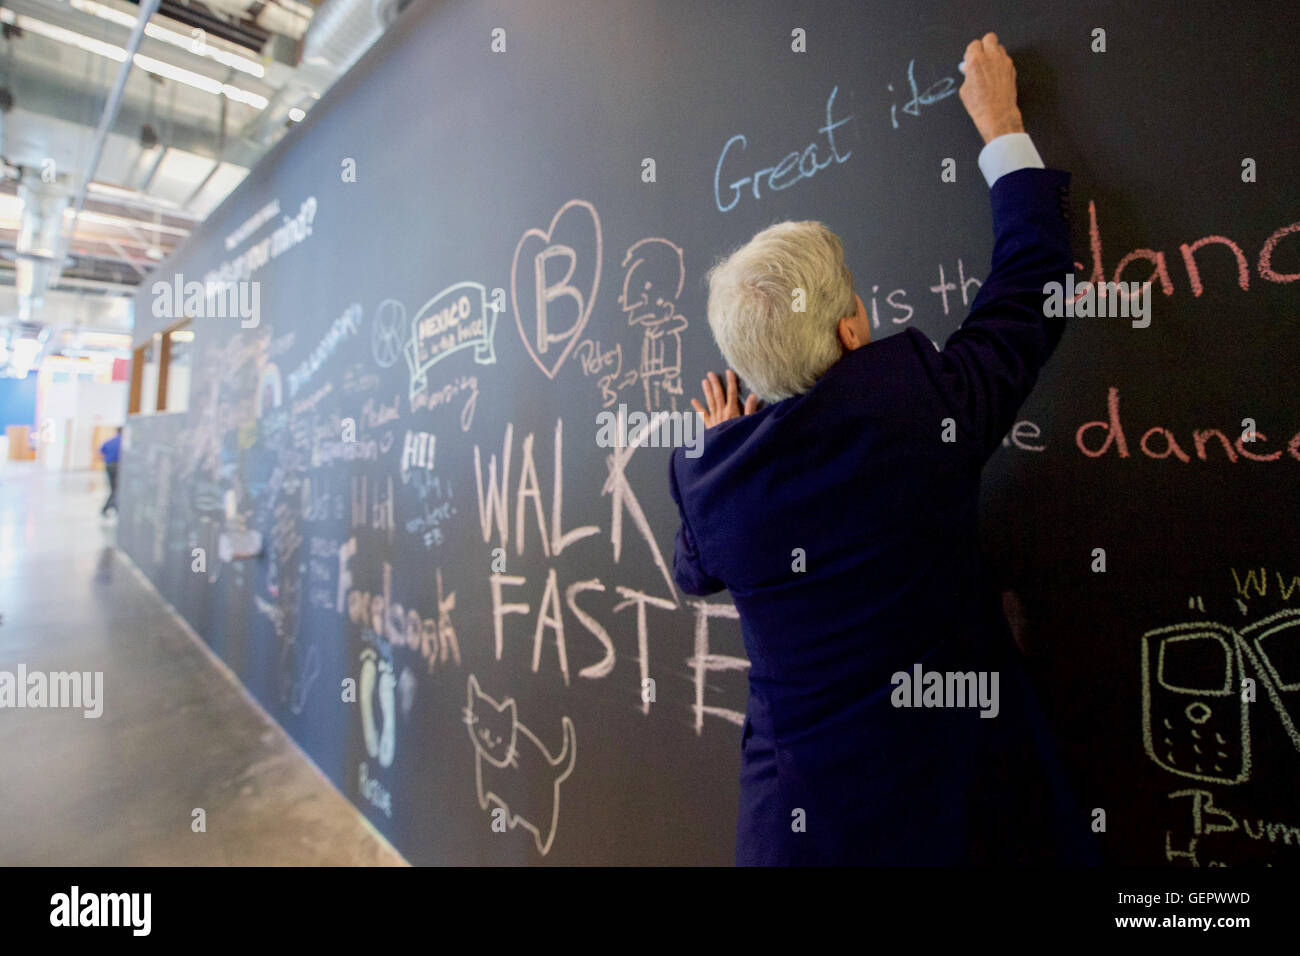 Secretary Kerry Signs a Message on Facebook's Wall at Their New Headquarters in Menlo Park Stock Photo